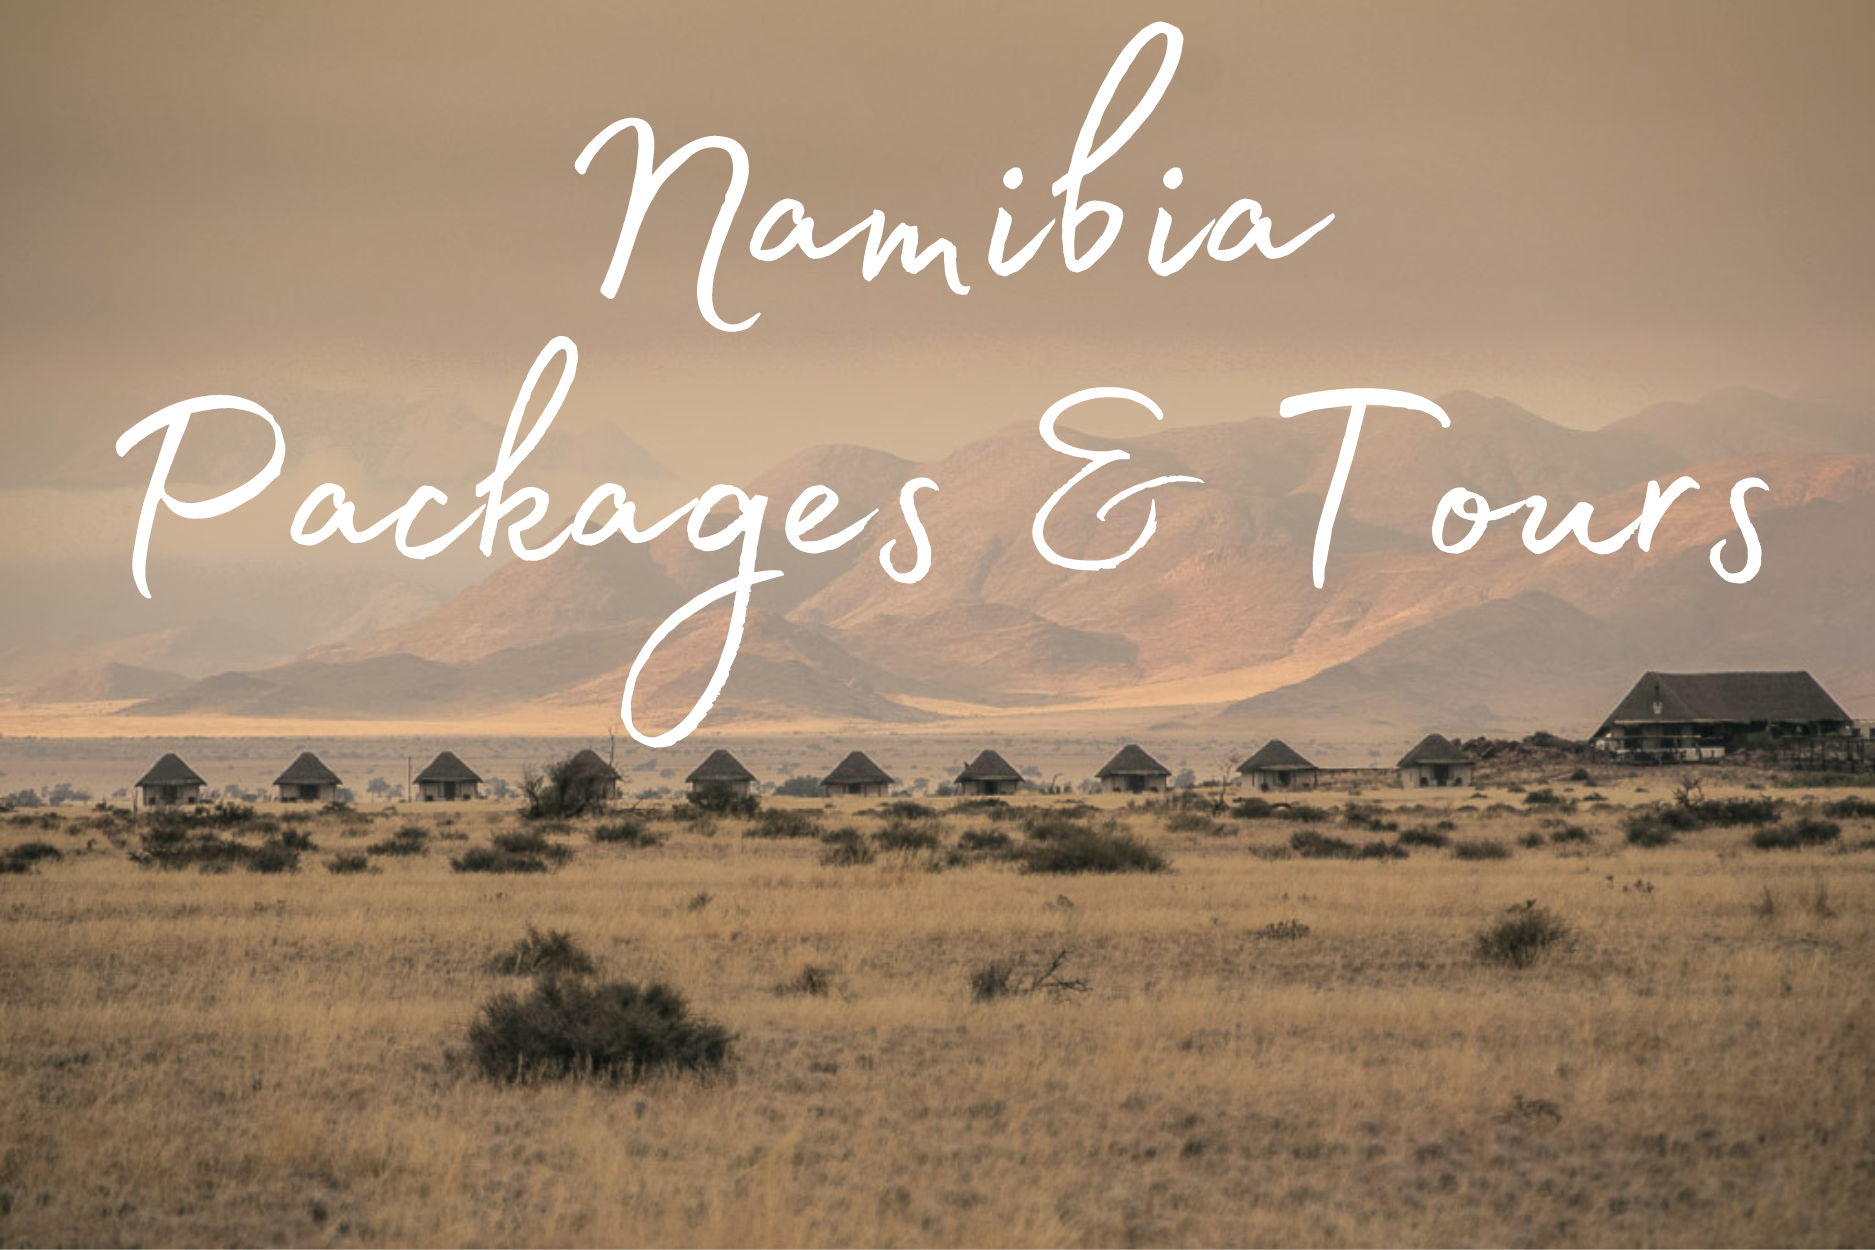 Namibia Packages & Tours